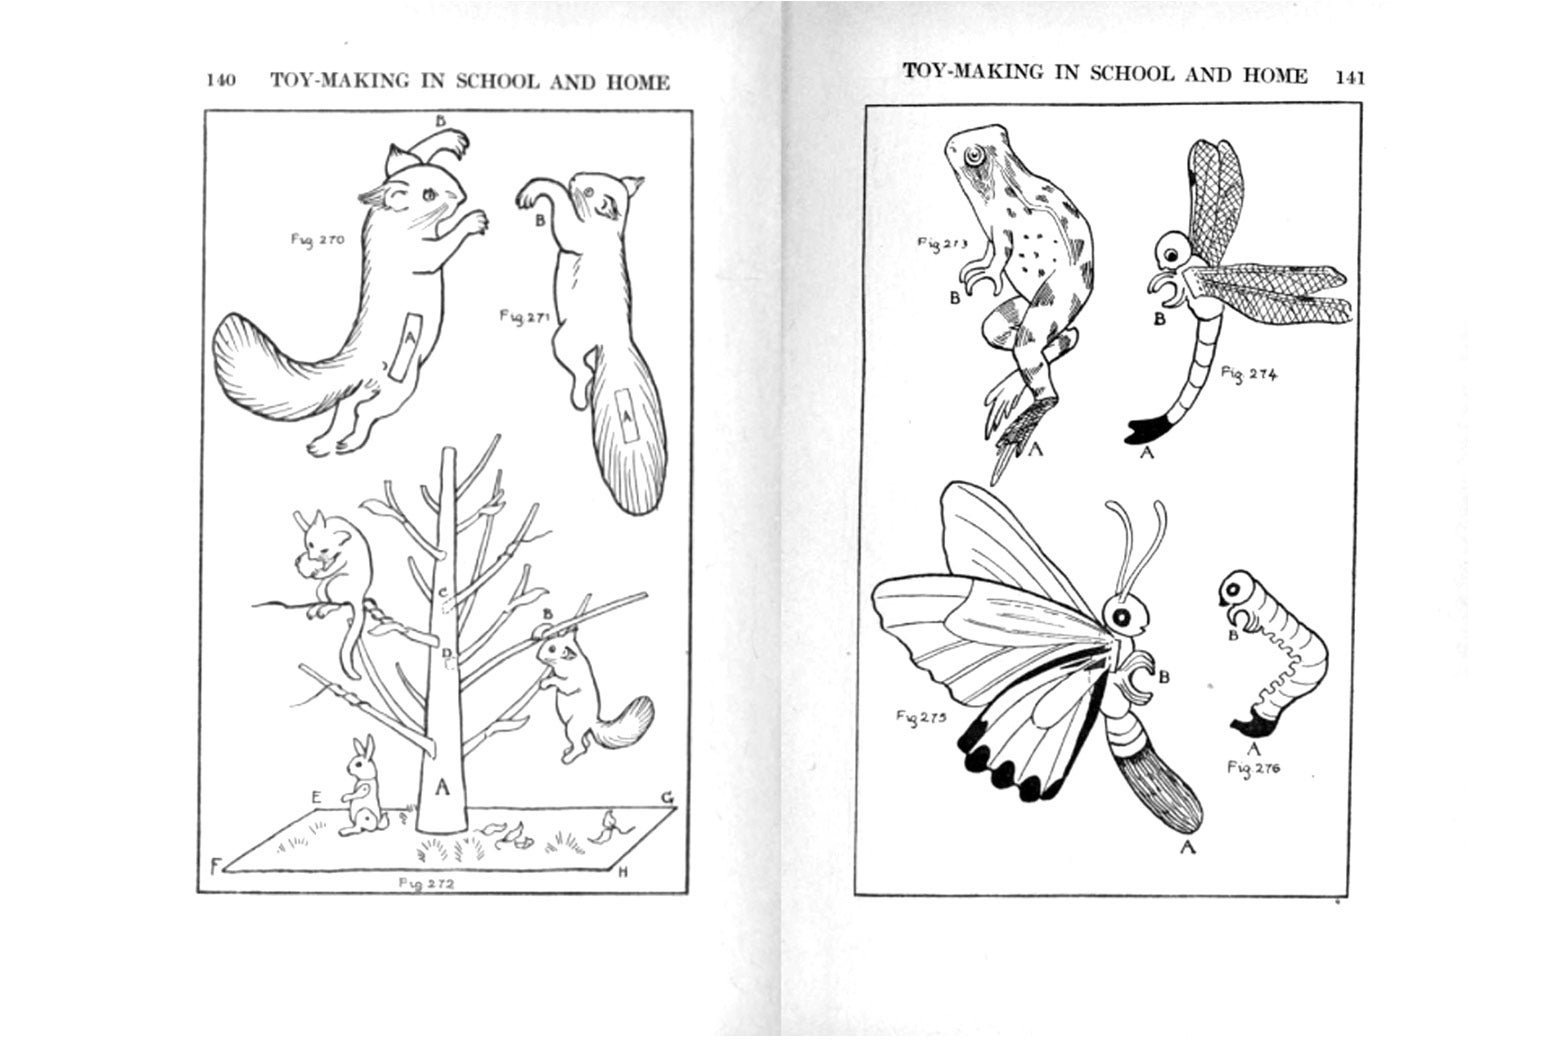 Diagrams on squirrels, insects, and nature from Toy-Making in School and Home (1916).